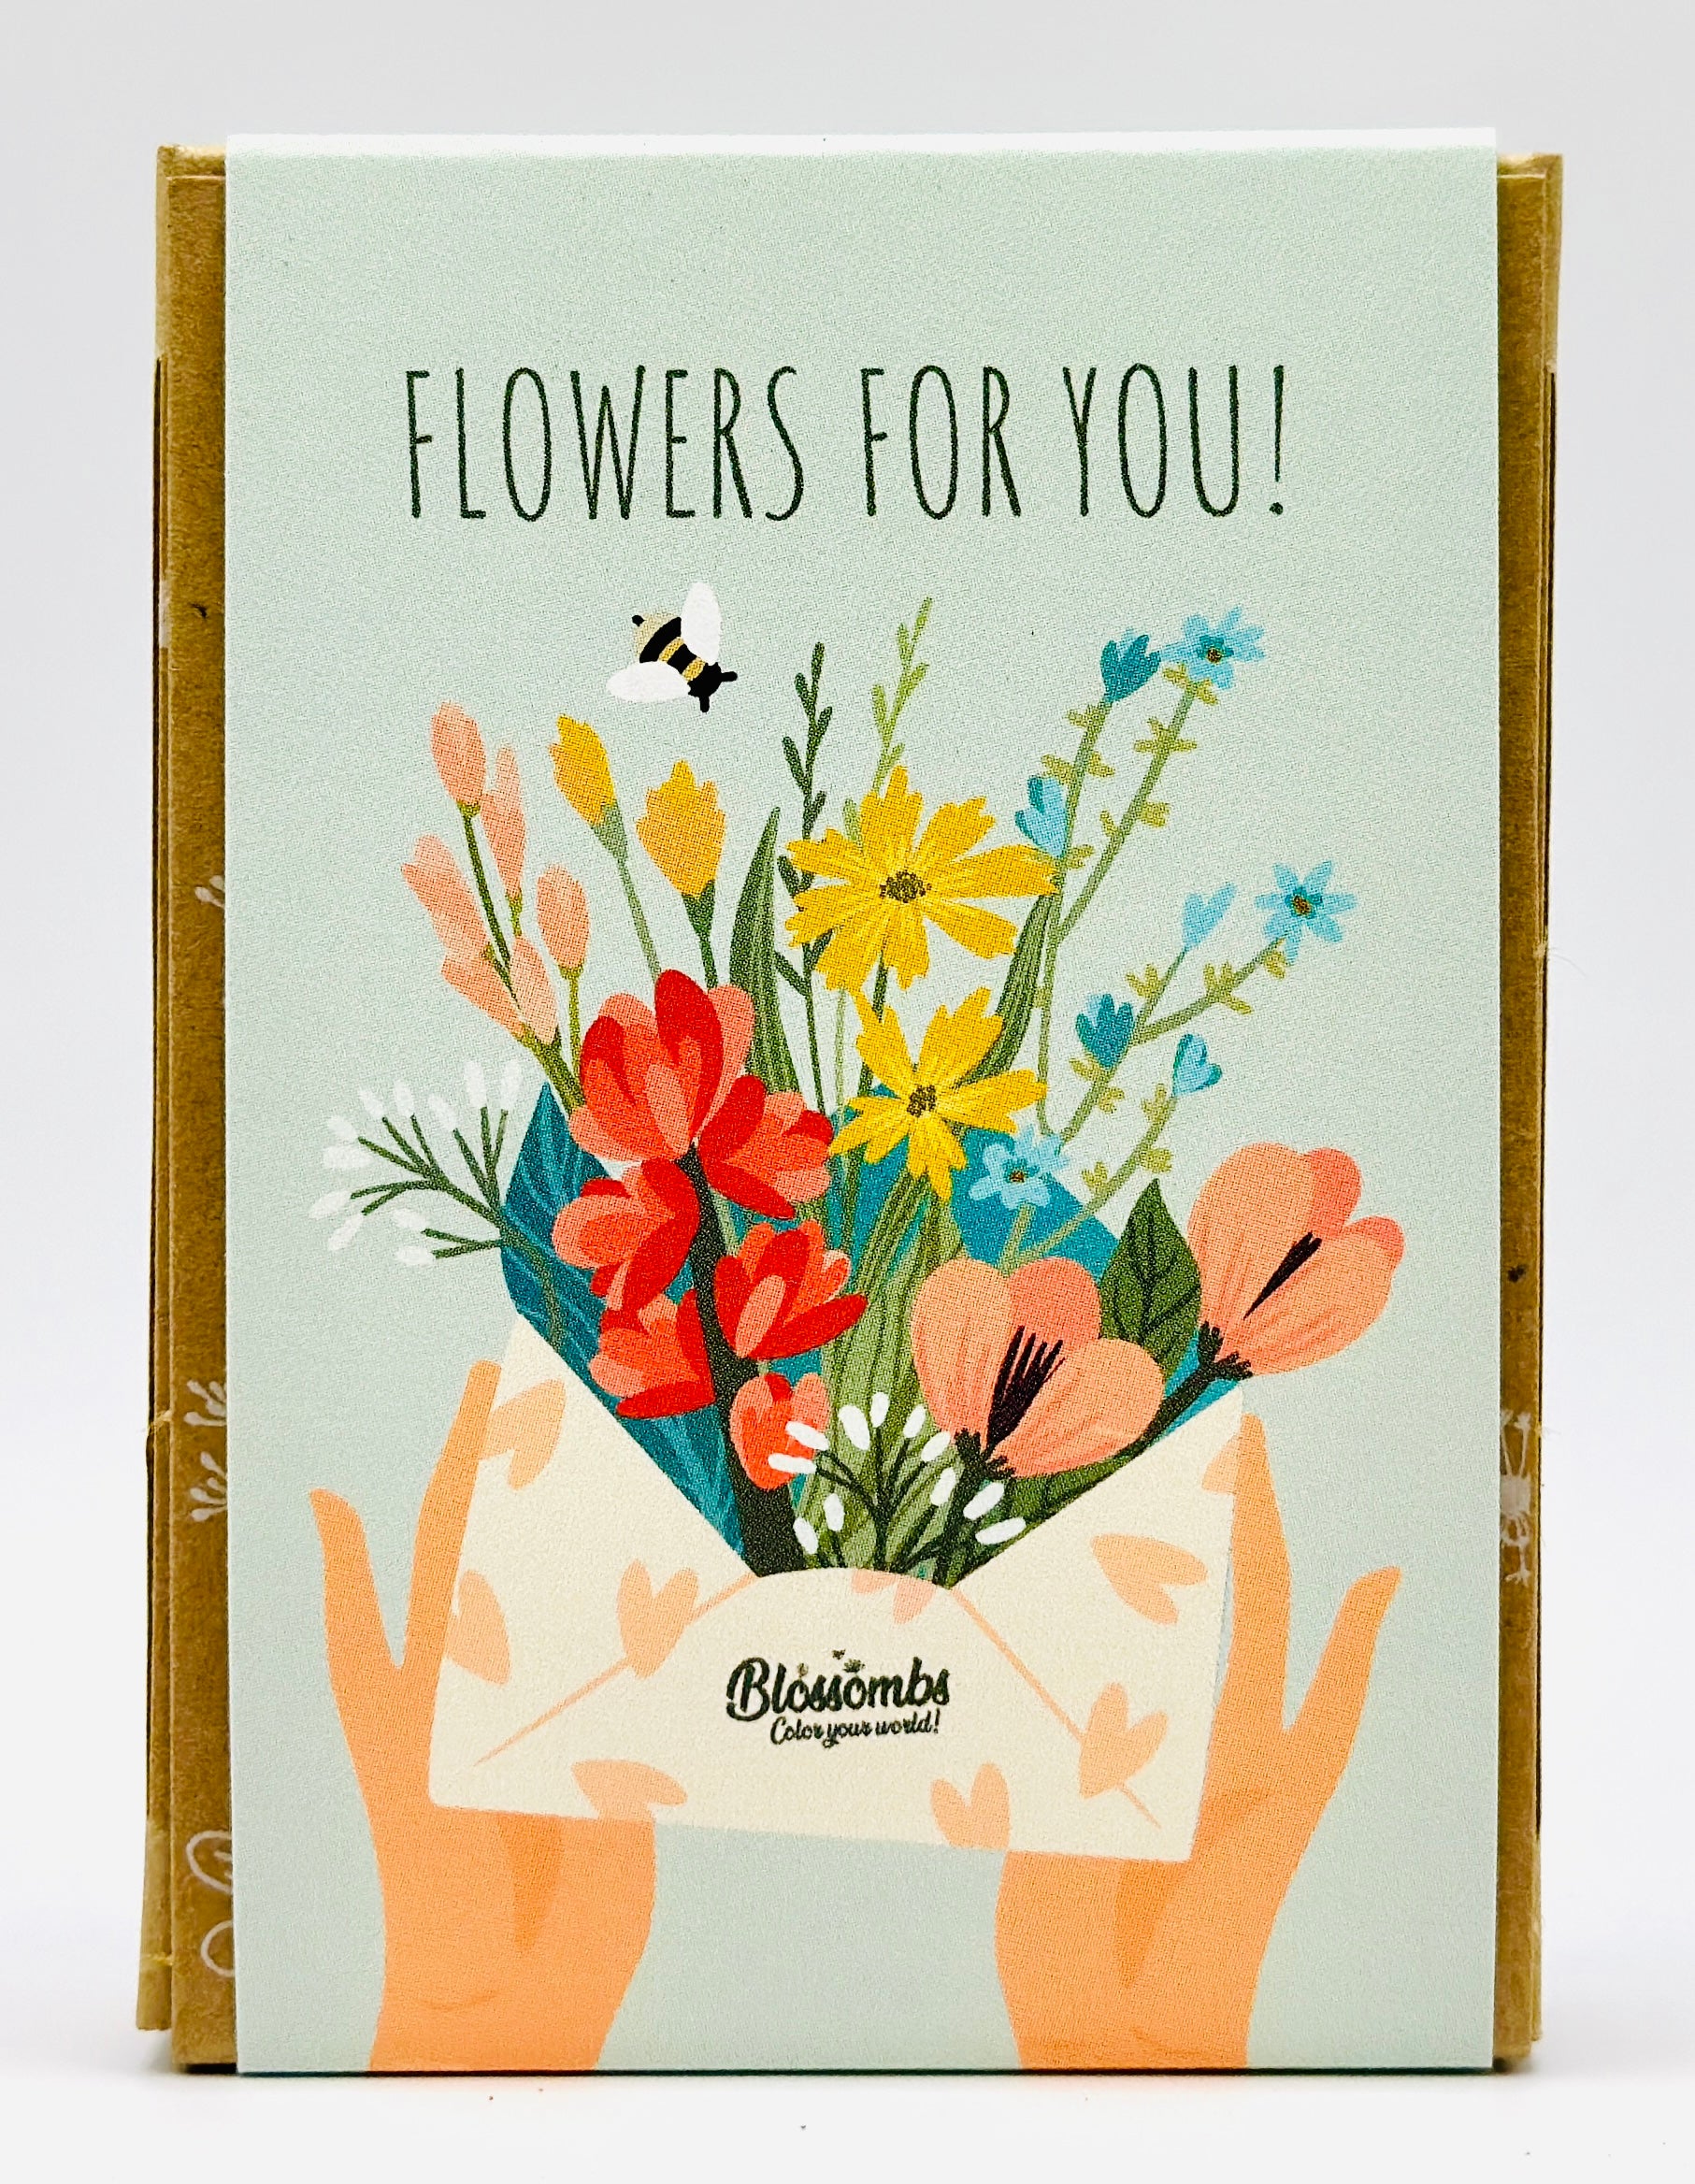 Blossombs Flowers For You Wildflower Seed Bomb Box